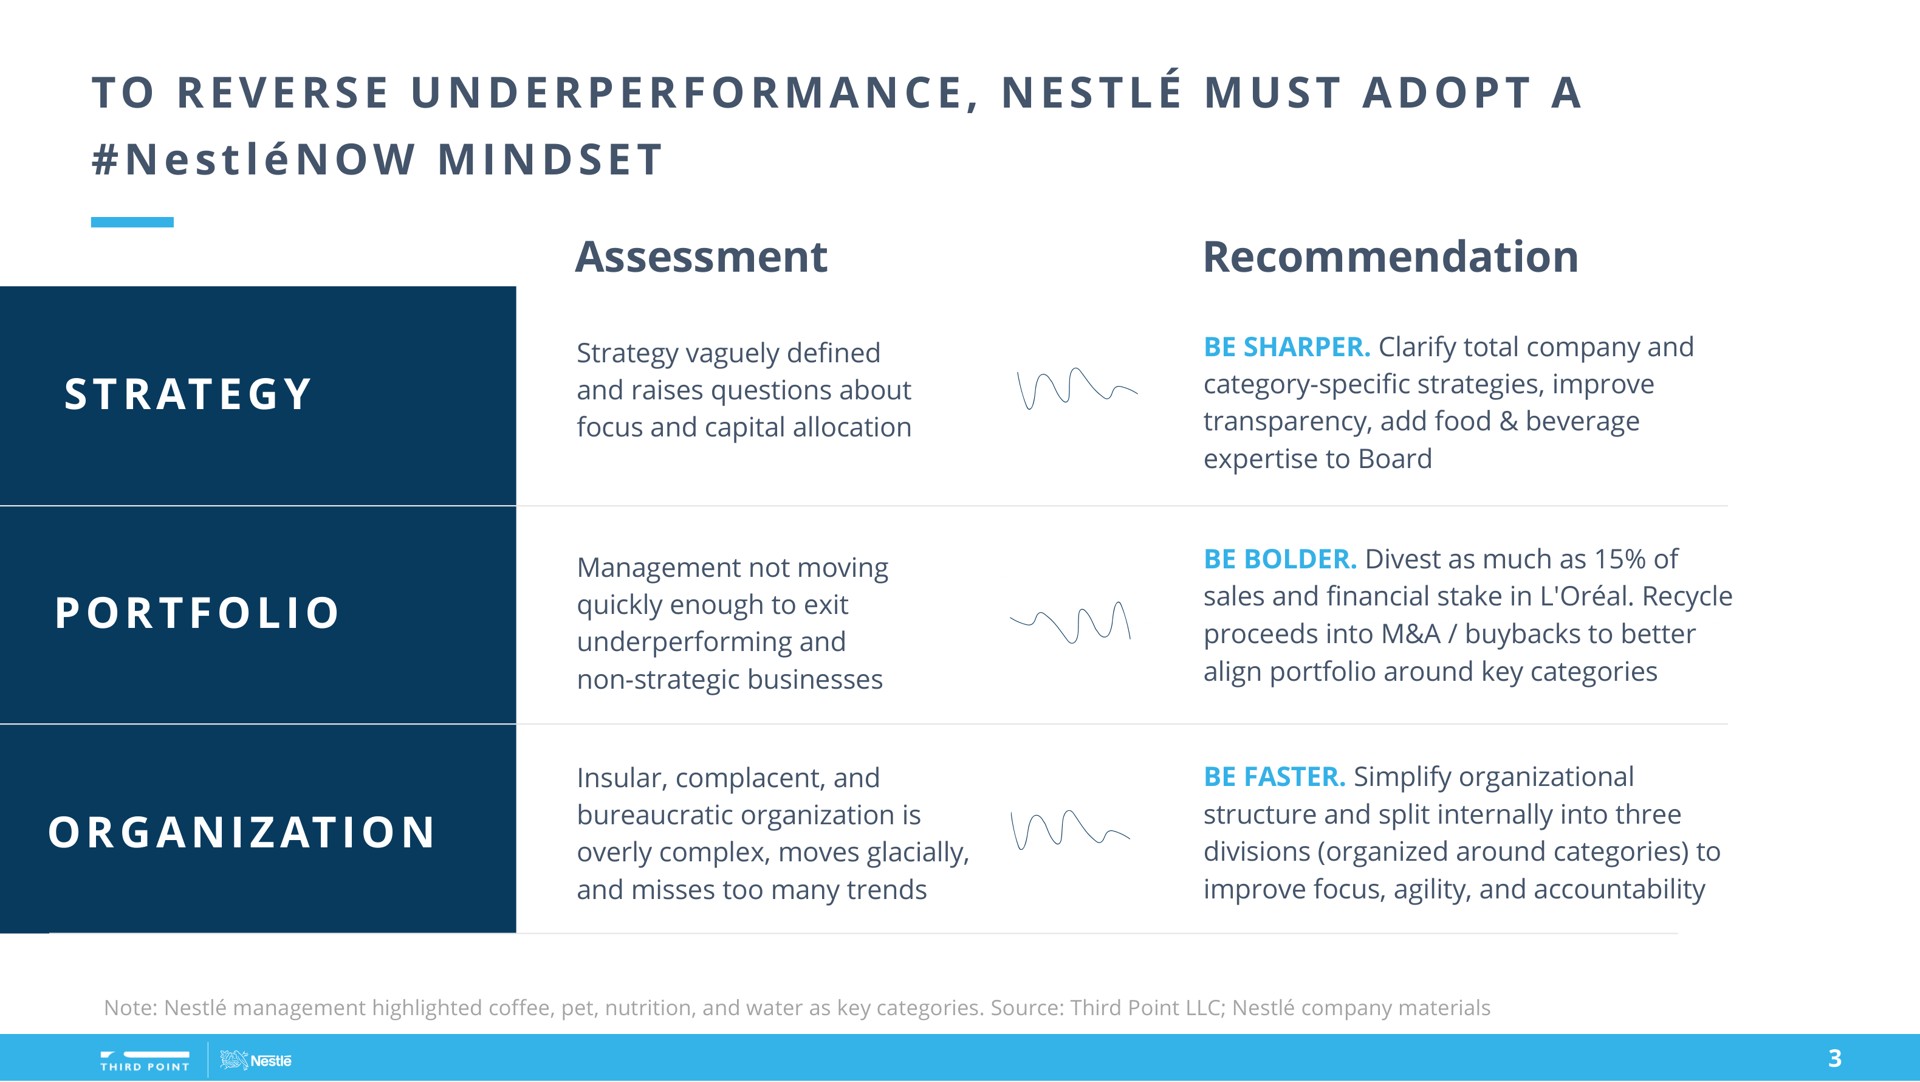 a a a i assessment recommendation at i a i at i to reverse nestle must adopt | Third Point Management